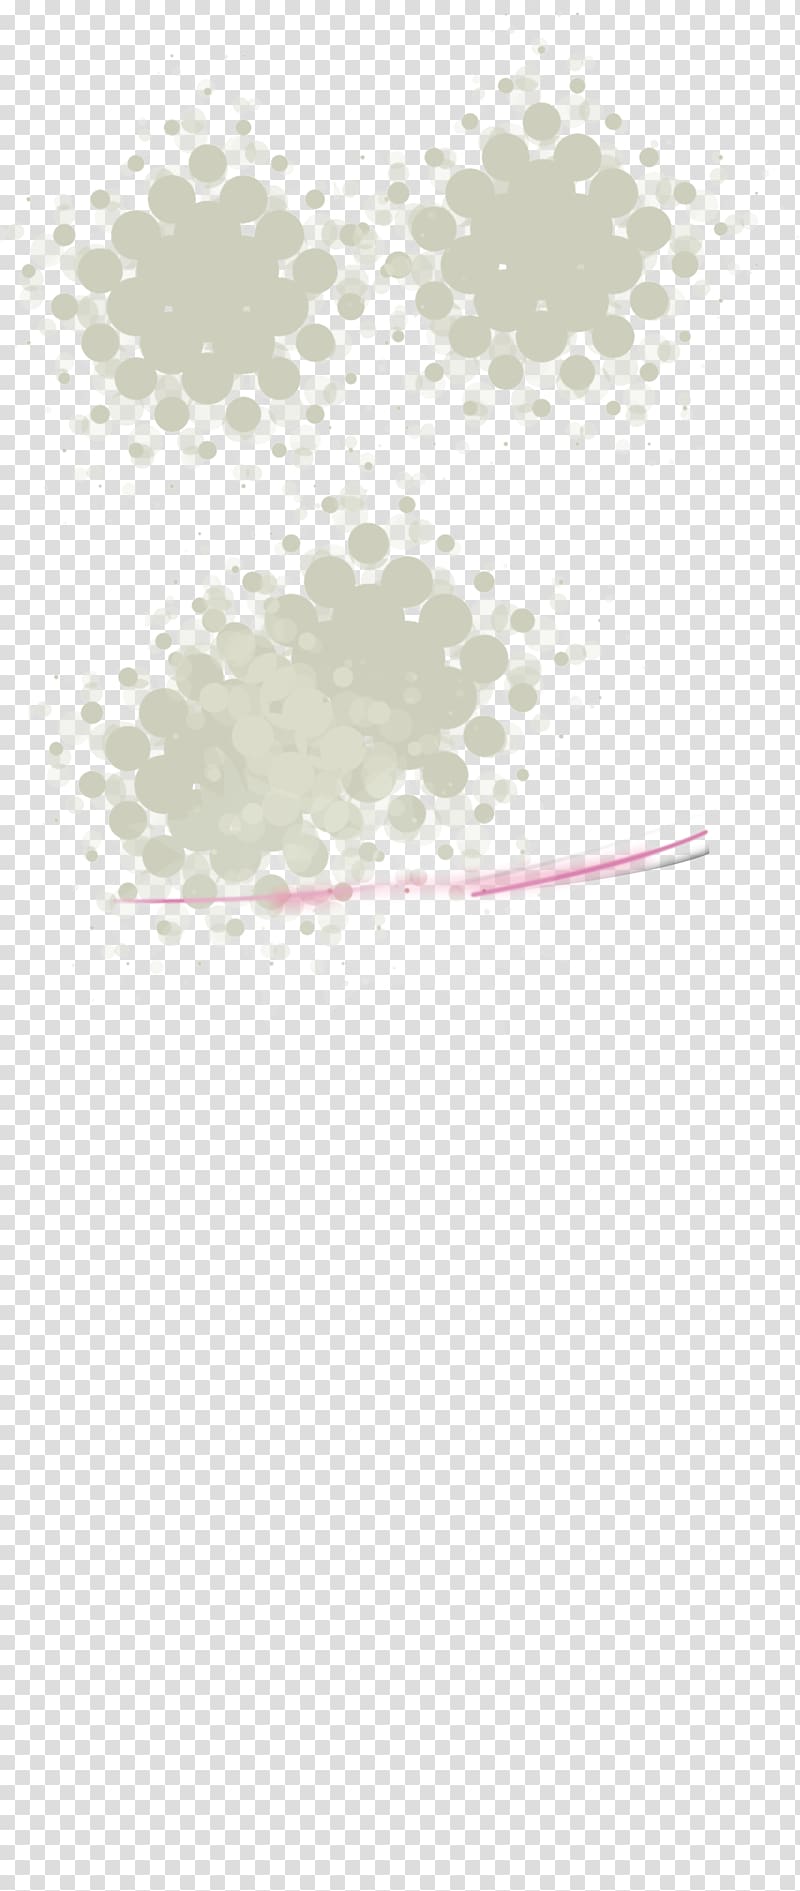 Light , Halo background material 6 transparent background PNG clipart